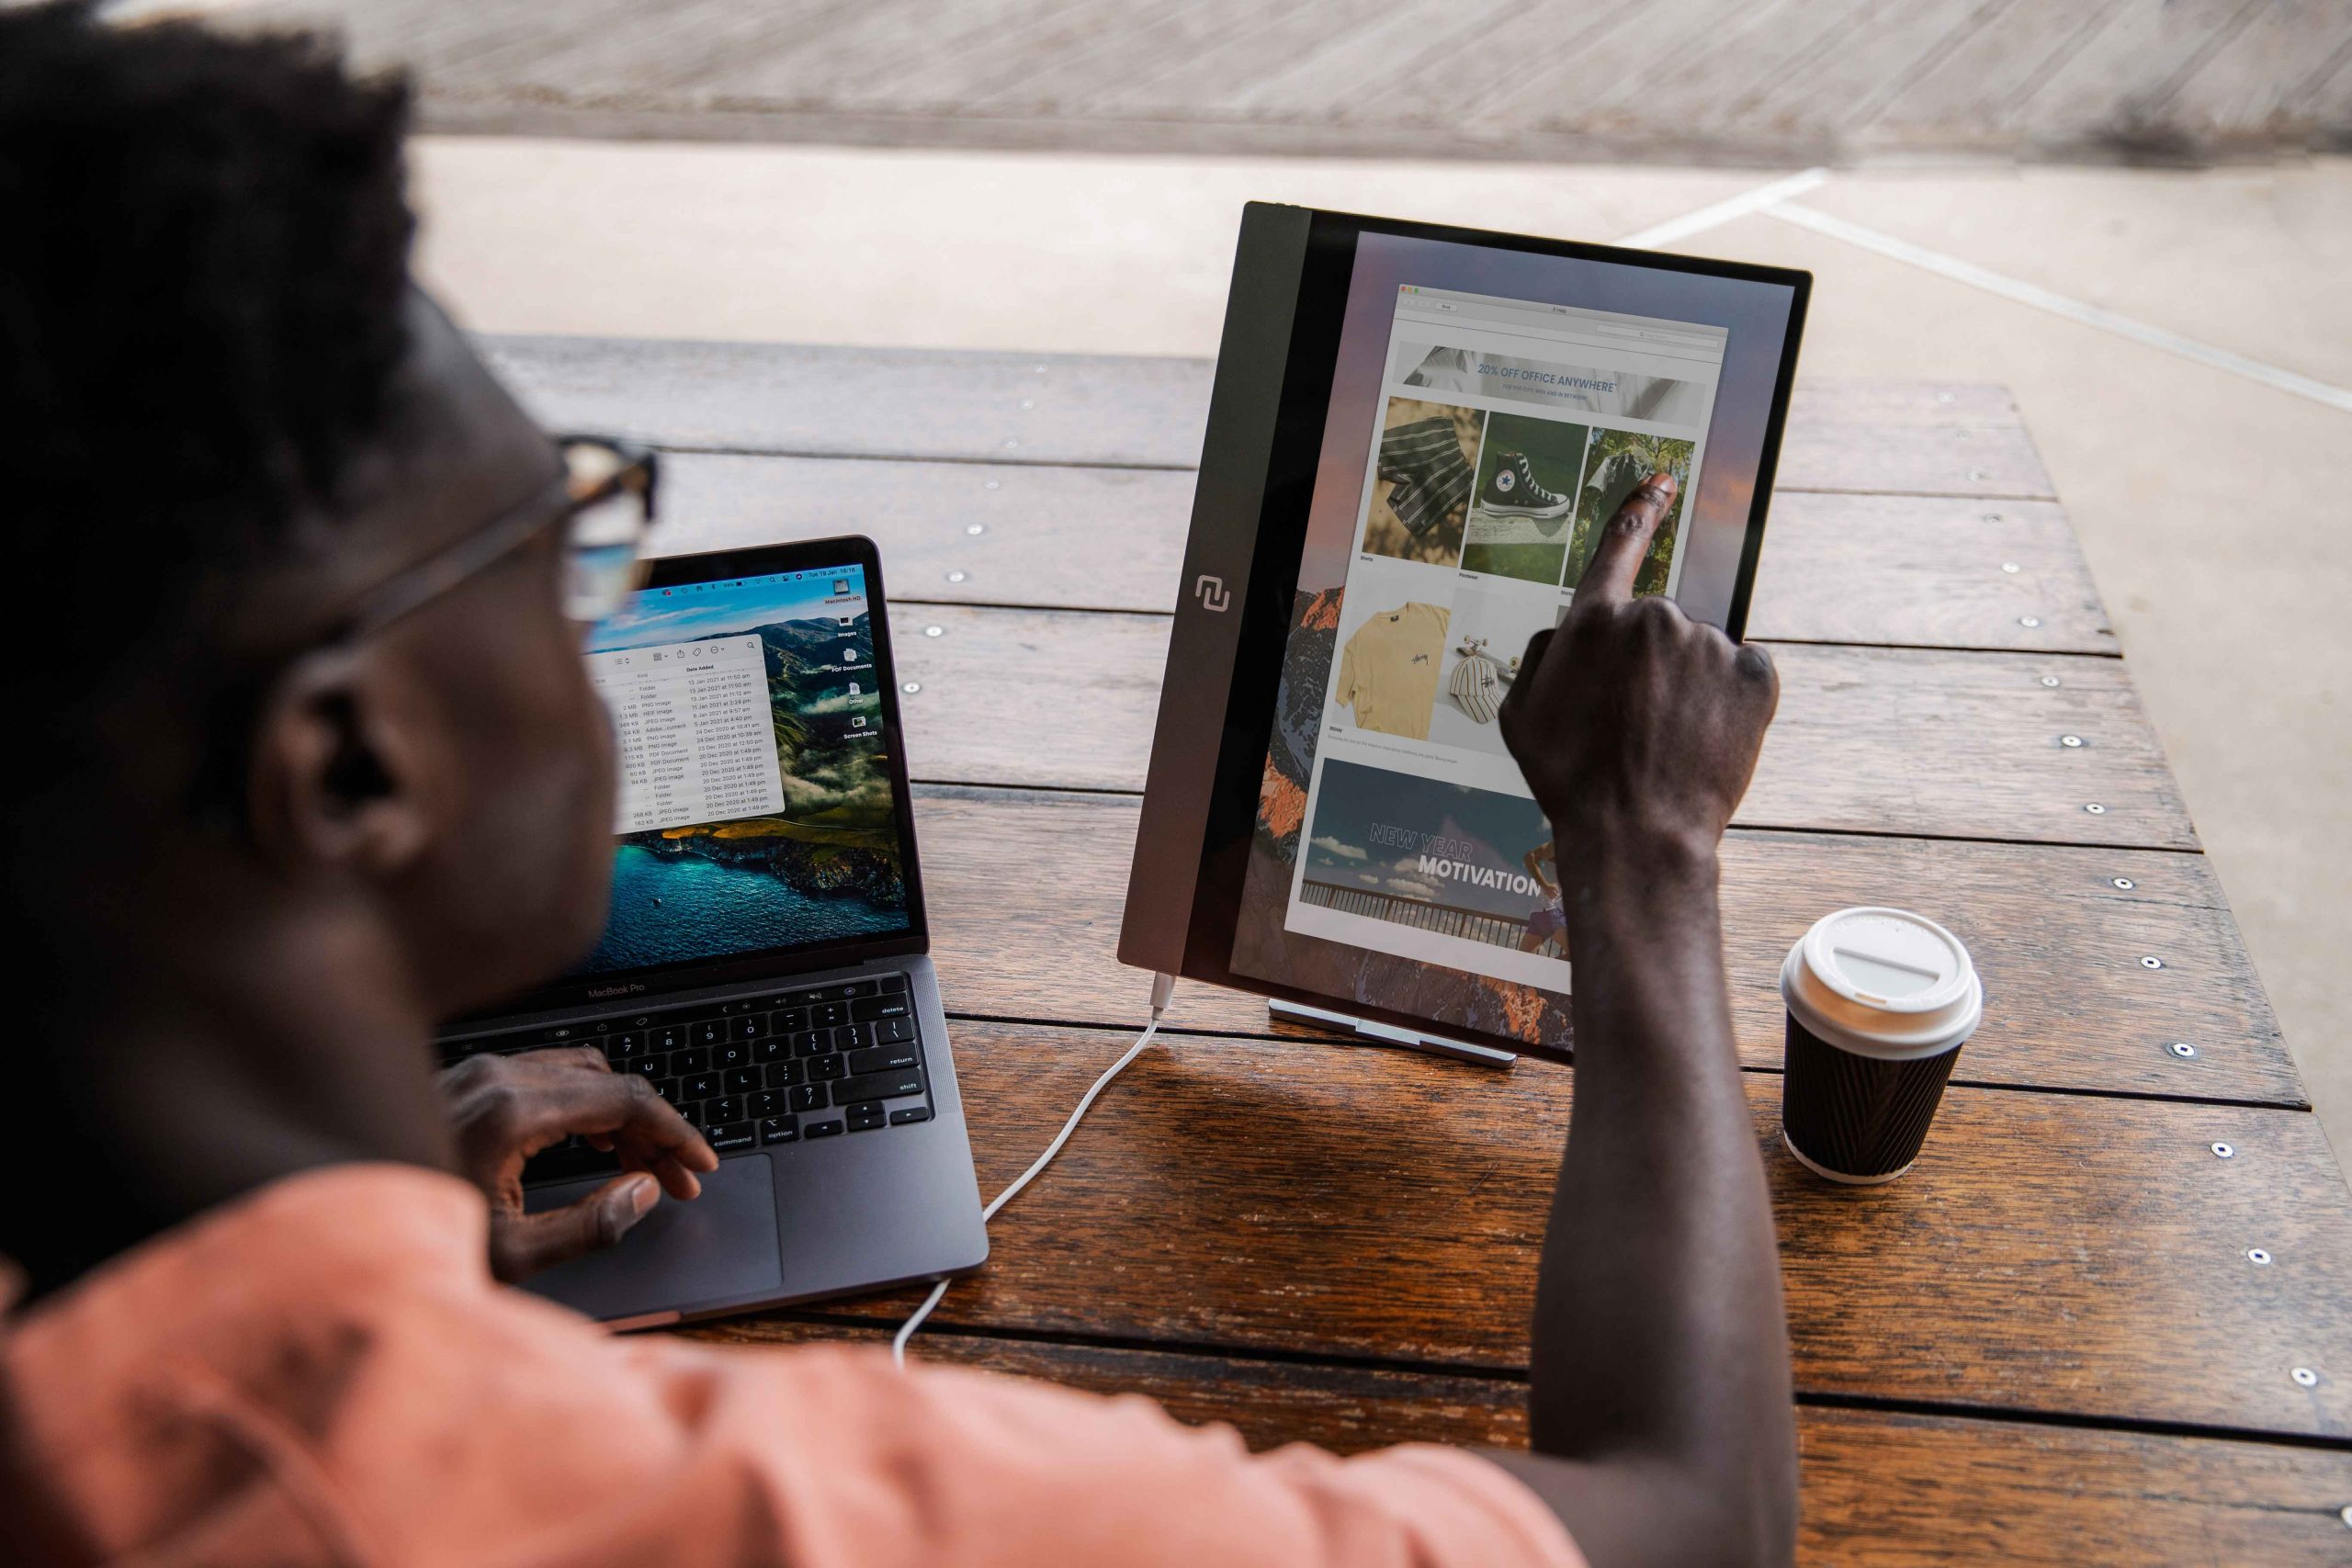 The espresso Display, the world’s thinnest touchscreen external monitor, is easily portable, giving dad that all-important second screen even when on the road. Photo courtesy of espresso